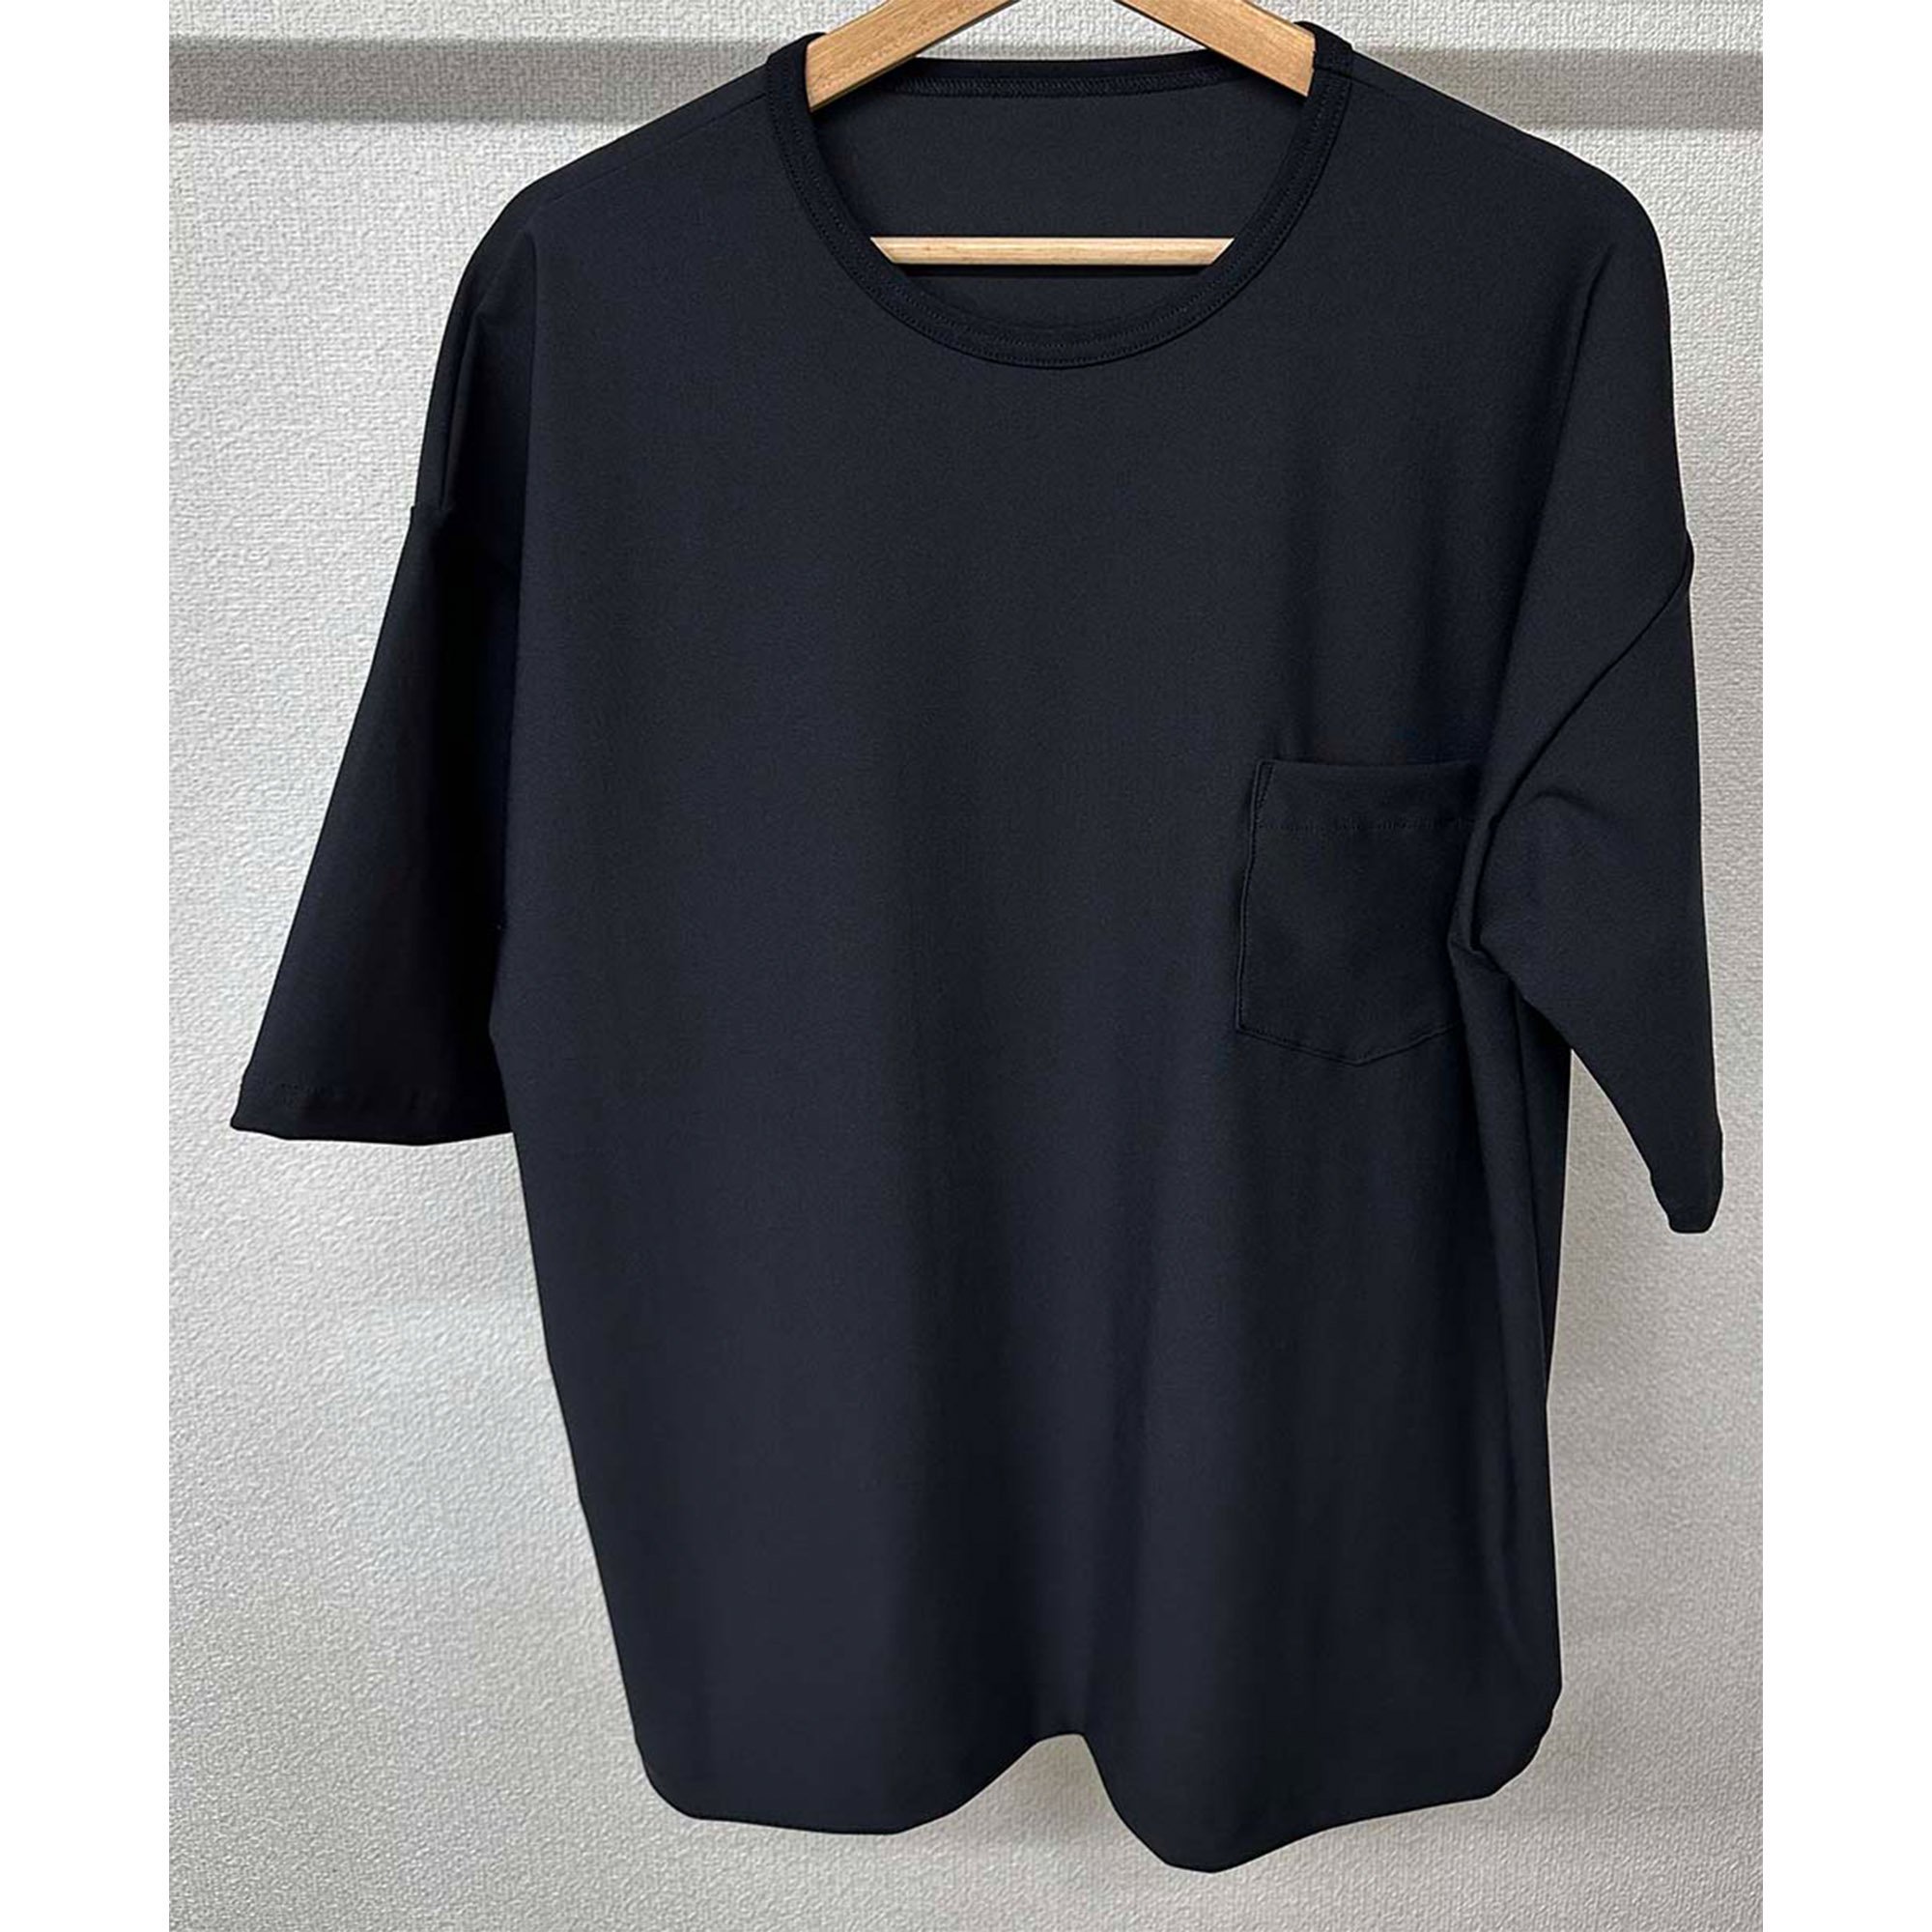 <img class='new_mark_img1' src='https://img.shop-pro.jp/img/new/icons1.gif' style='border:none;display:inline;margin:0px;padding:0px;width:auto;' />tricot pocket TEE BLACK